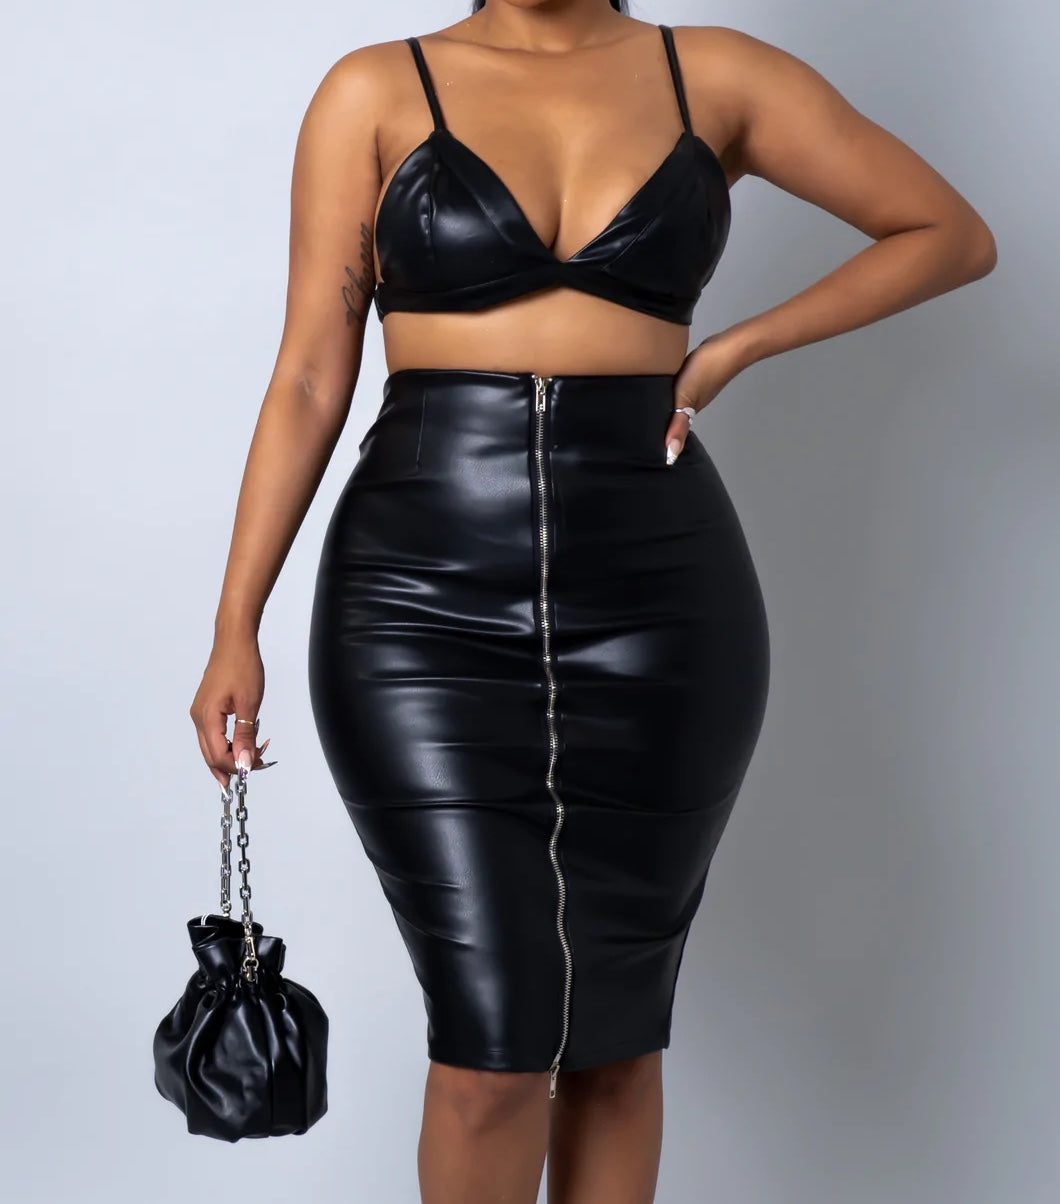 The Headliner Vegan Leather Midi Skirt Set (BLACK )SimplyDerri
Keep it cute and classy with Our Headliner Vegan Leather Midi Skirt Set. Featuring a midi skirt and matching crop top made of soft vegan leather fabric; this outfitOutfit SetsHeadliner Vegan Leather Midi Skirt Set (BLACK )